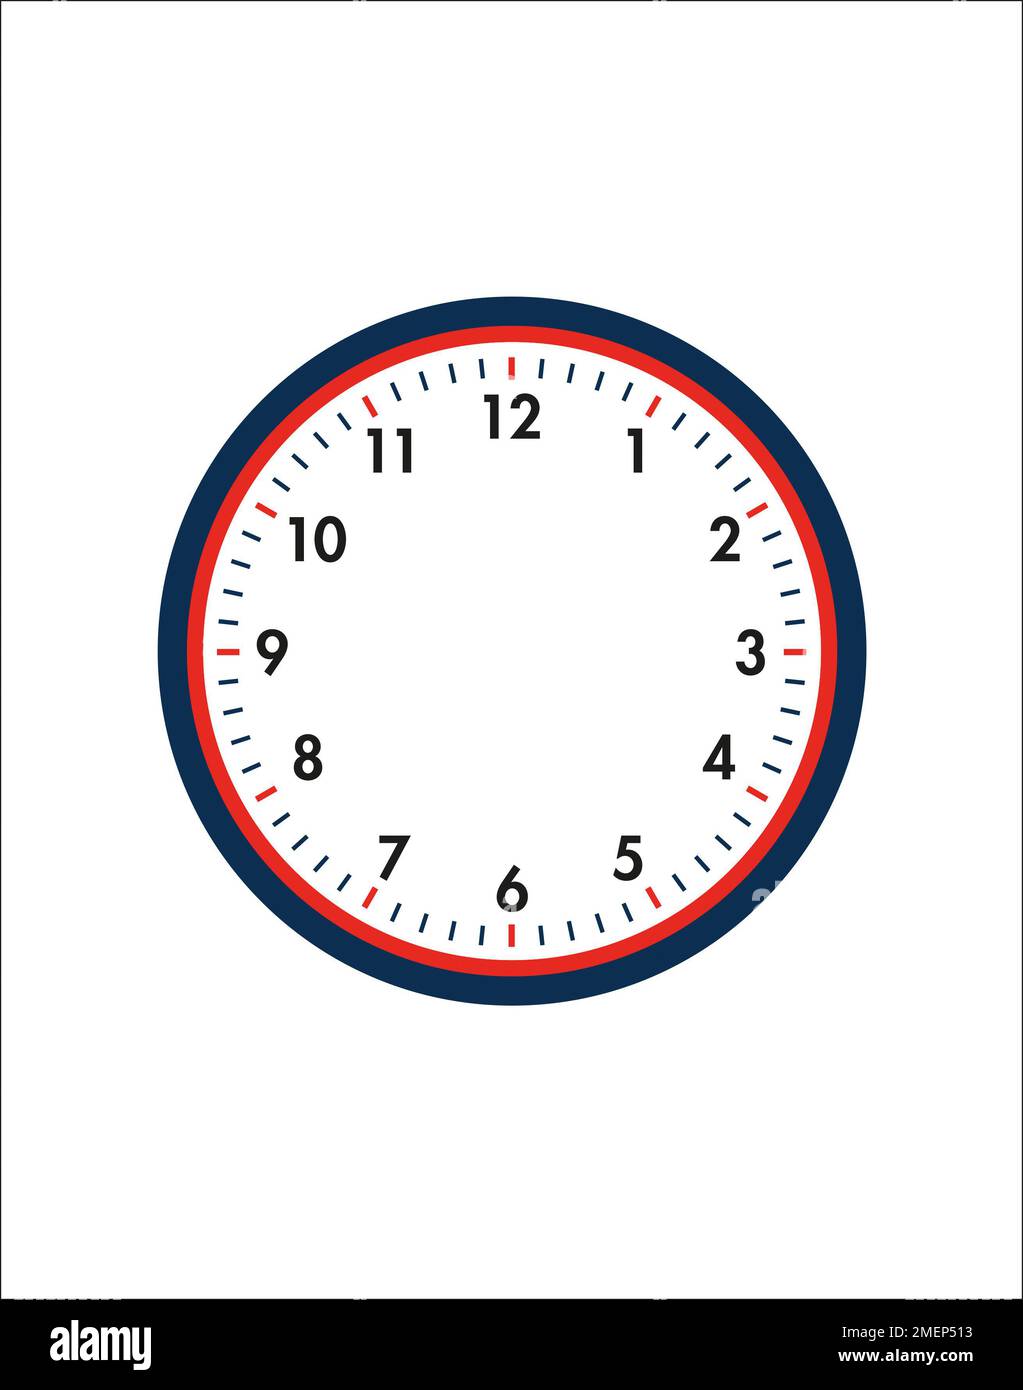 Jacket Clock - How to Tell the Time Stock Photo